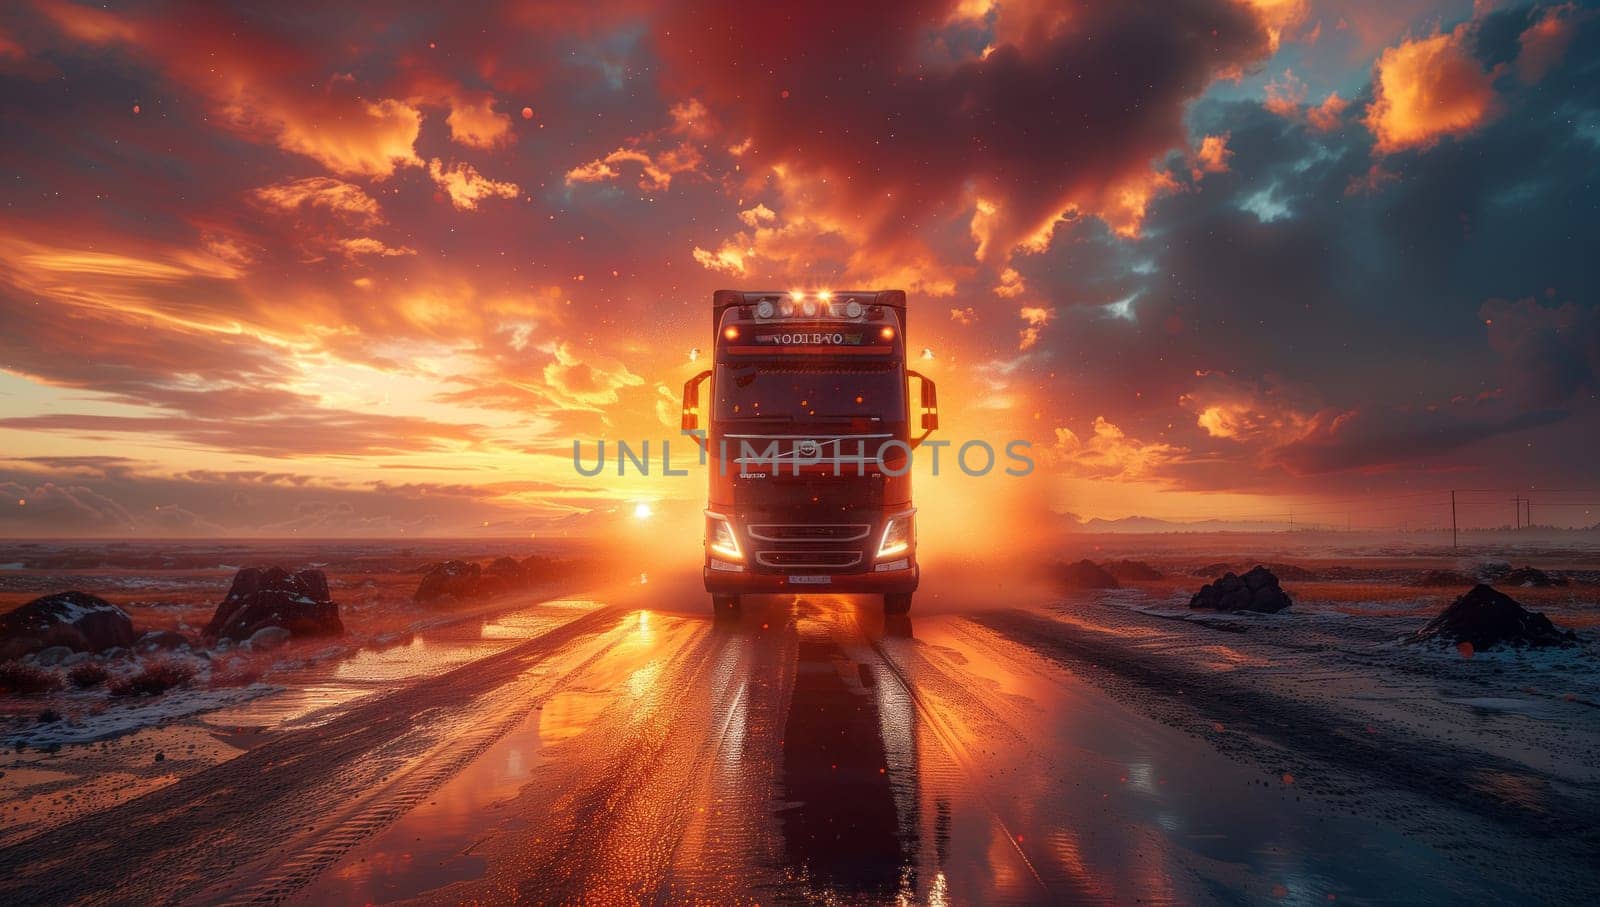 Truck navigating snowy road at sunset, beneath a colorful sky by richwolf